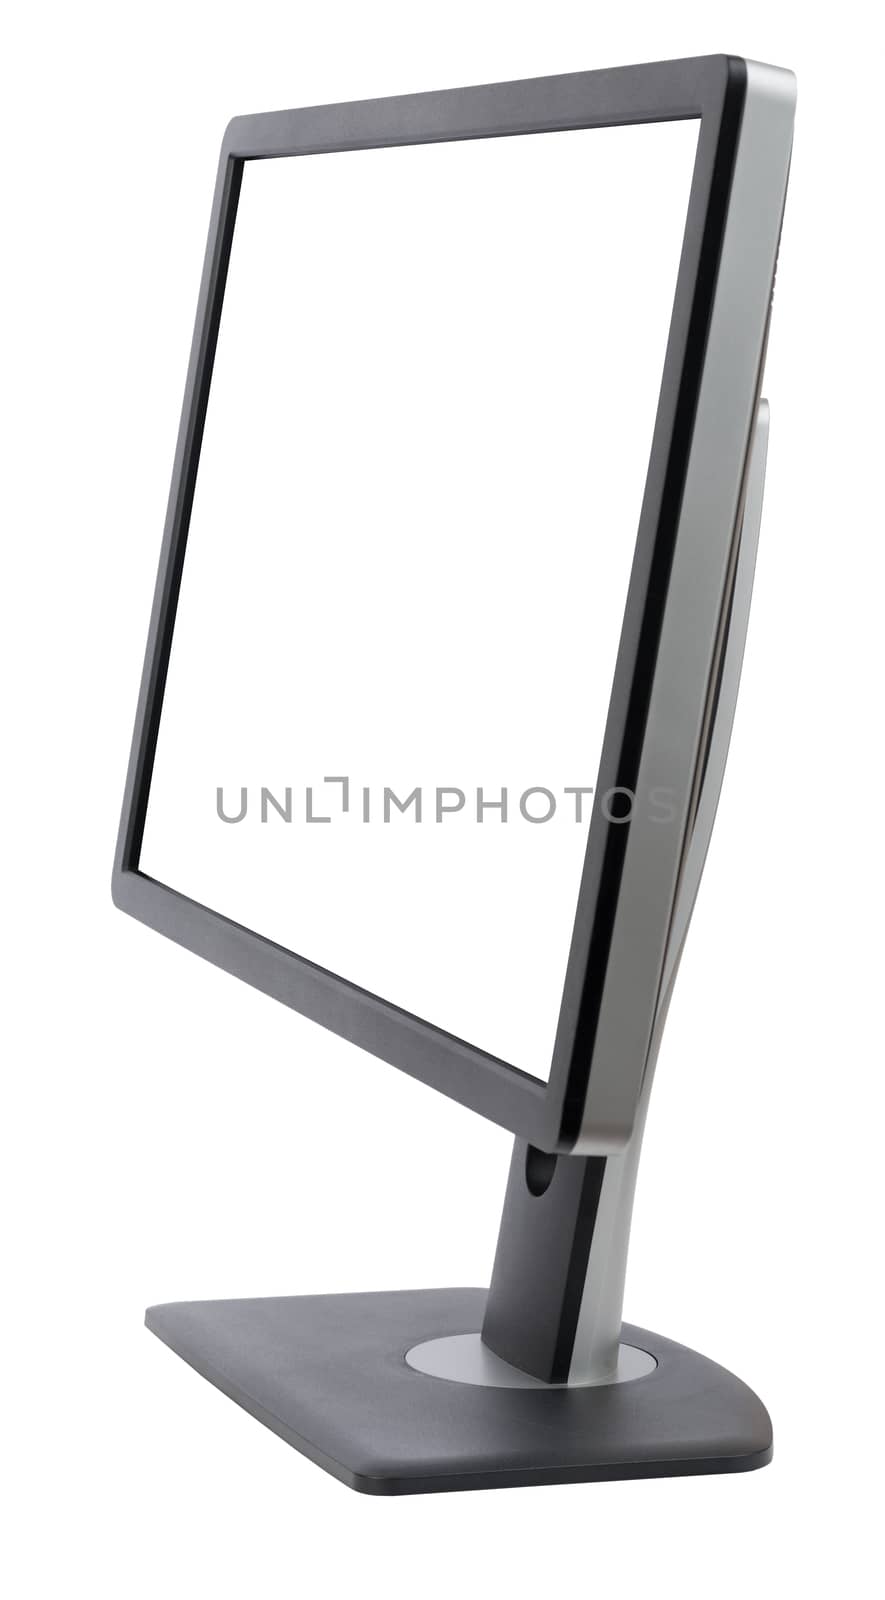 Display on isolated white background, side view